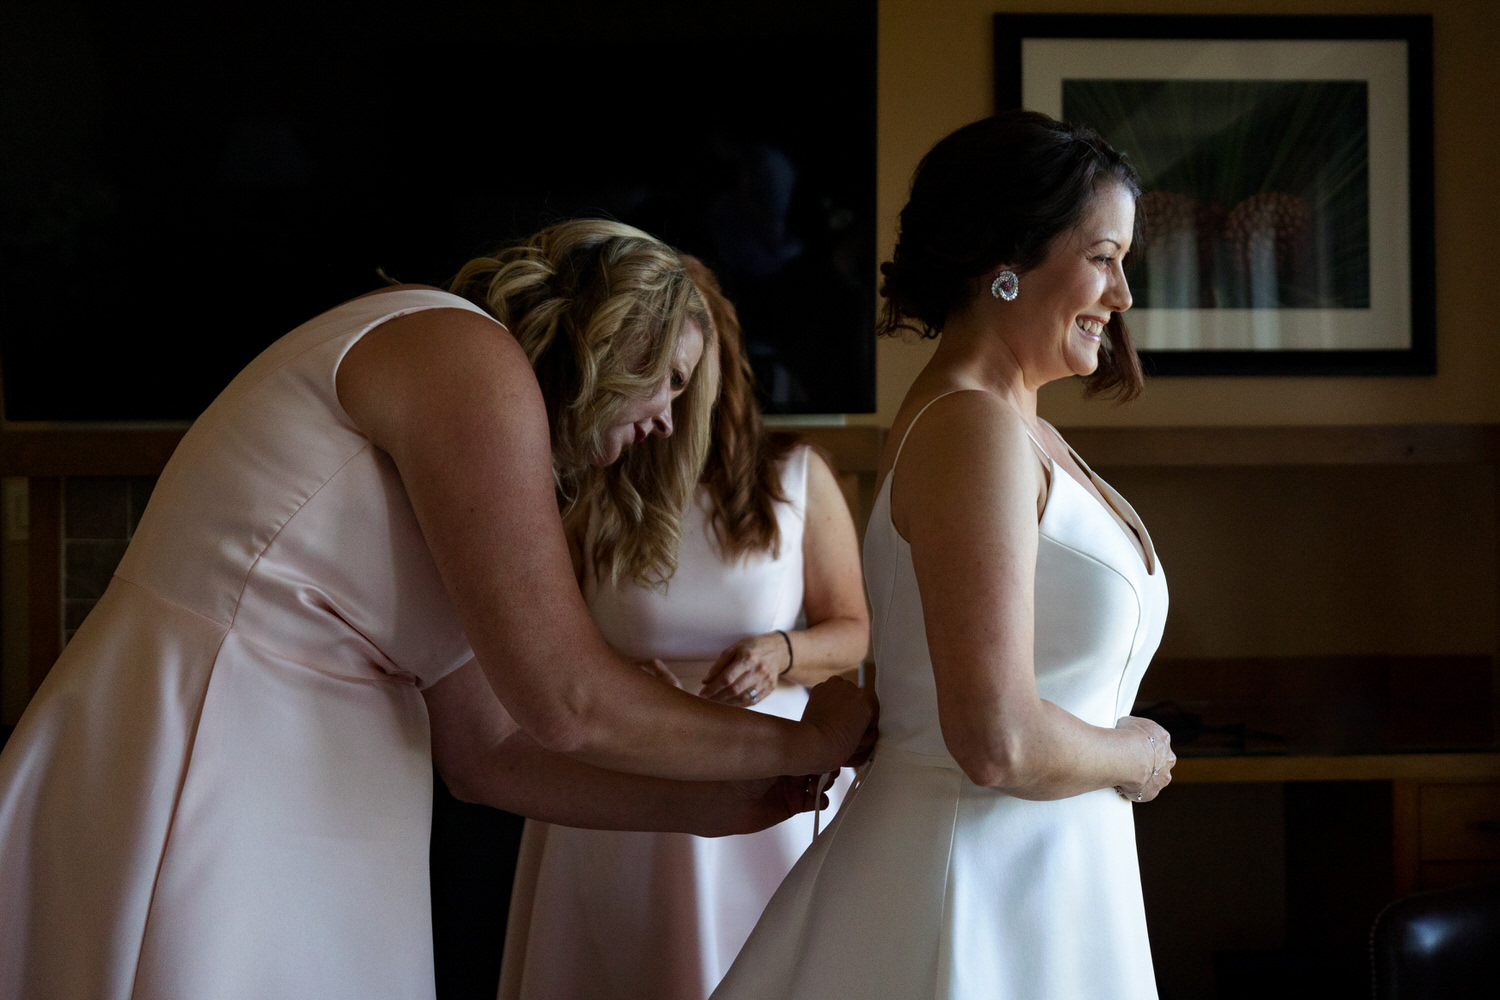 Bridesmaids help the bride lace up the back of her wedding dress in a Ritz Carlton hotel room.